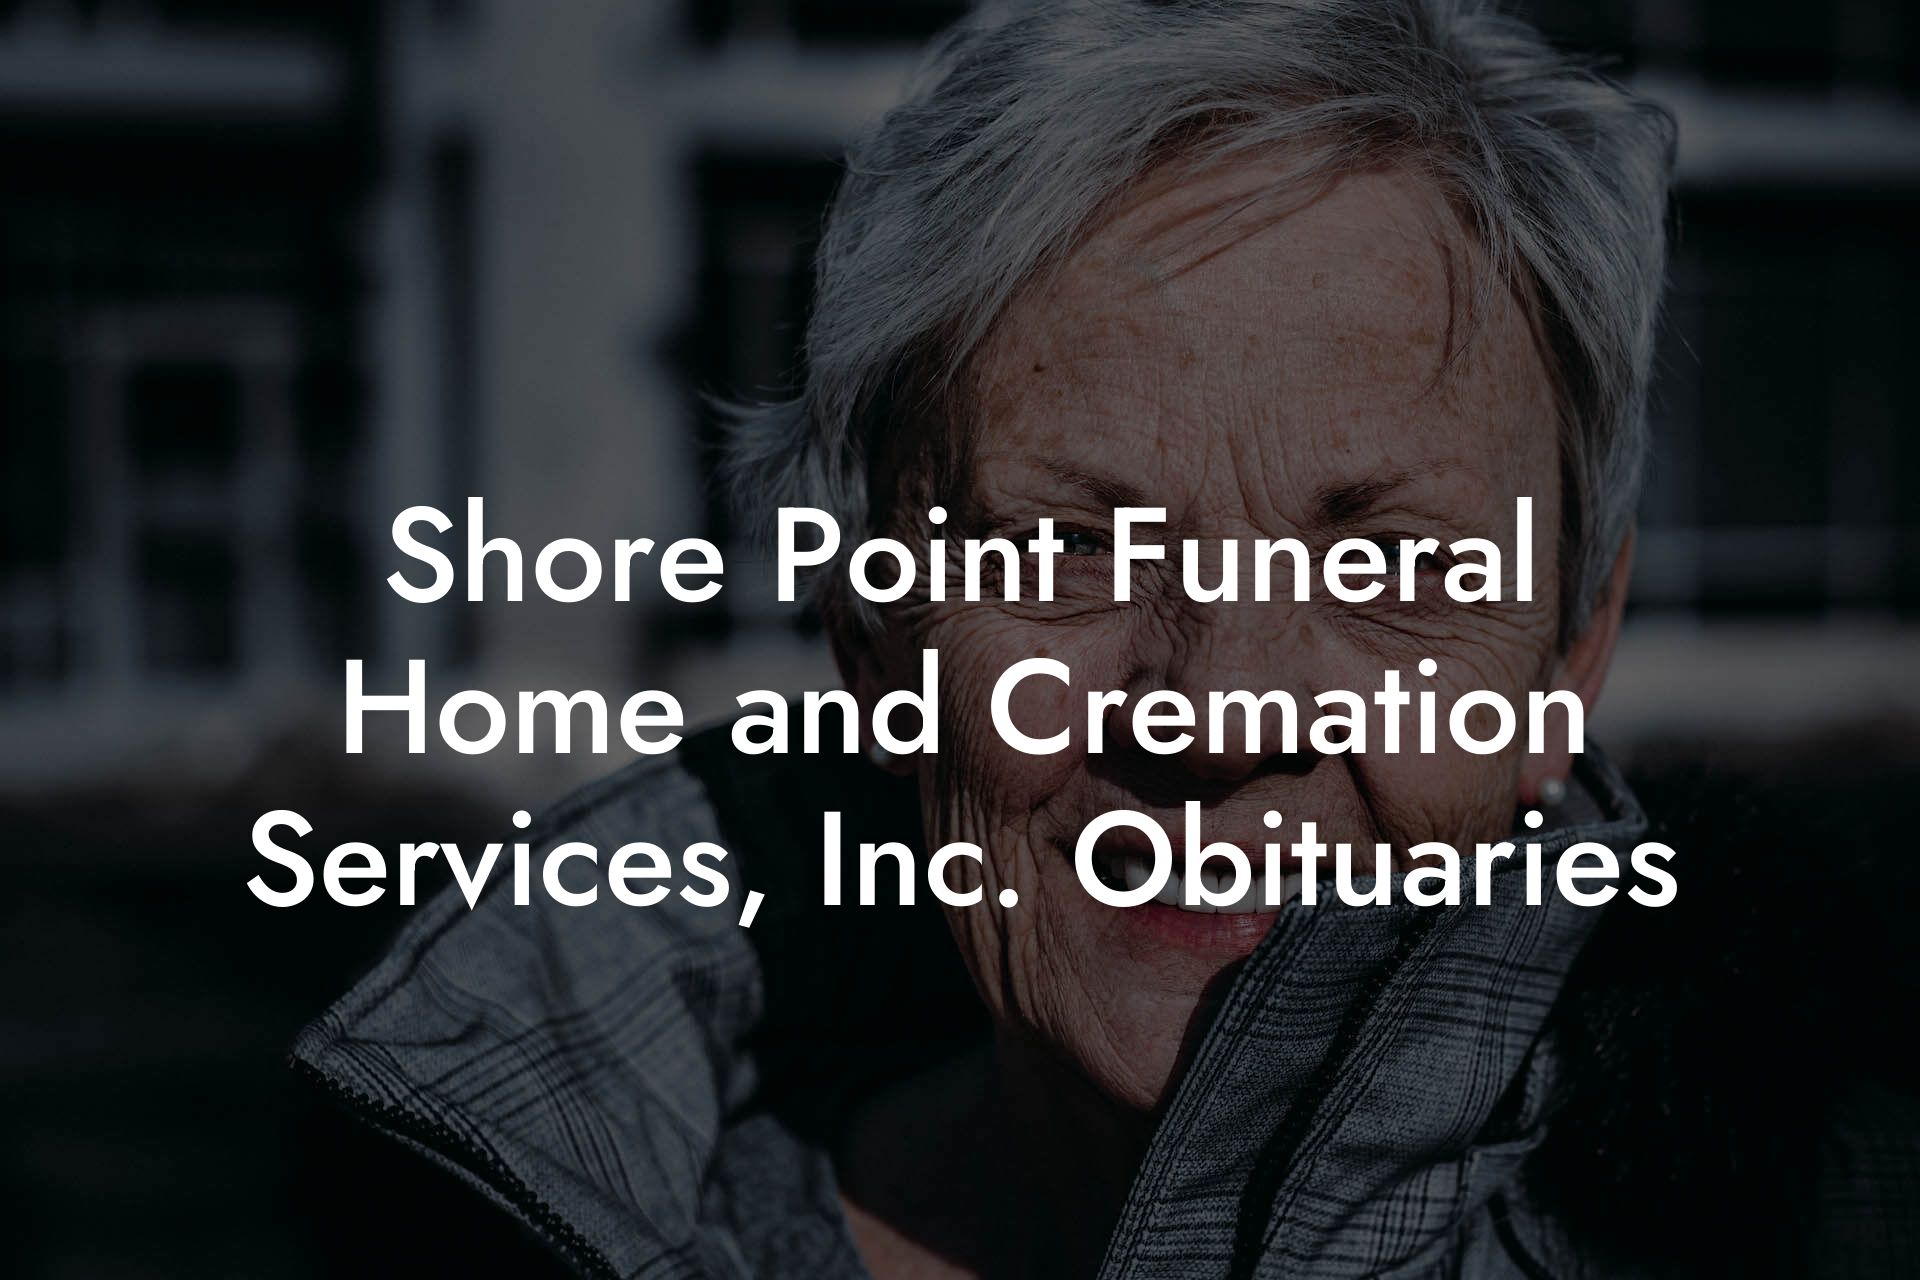 Shore Point Funeral Home and Cremation Services, Inc. Obituaries